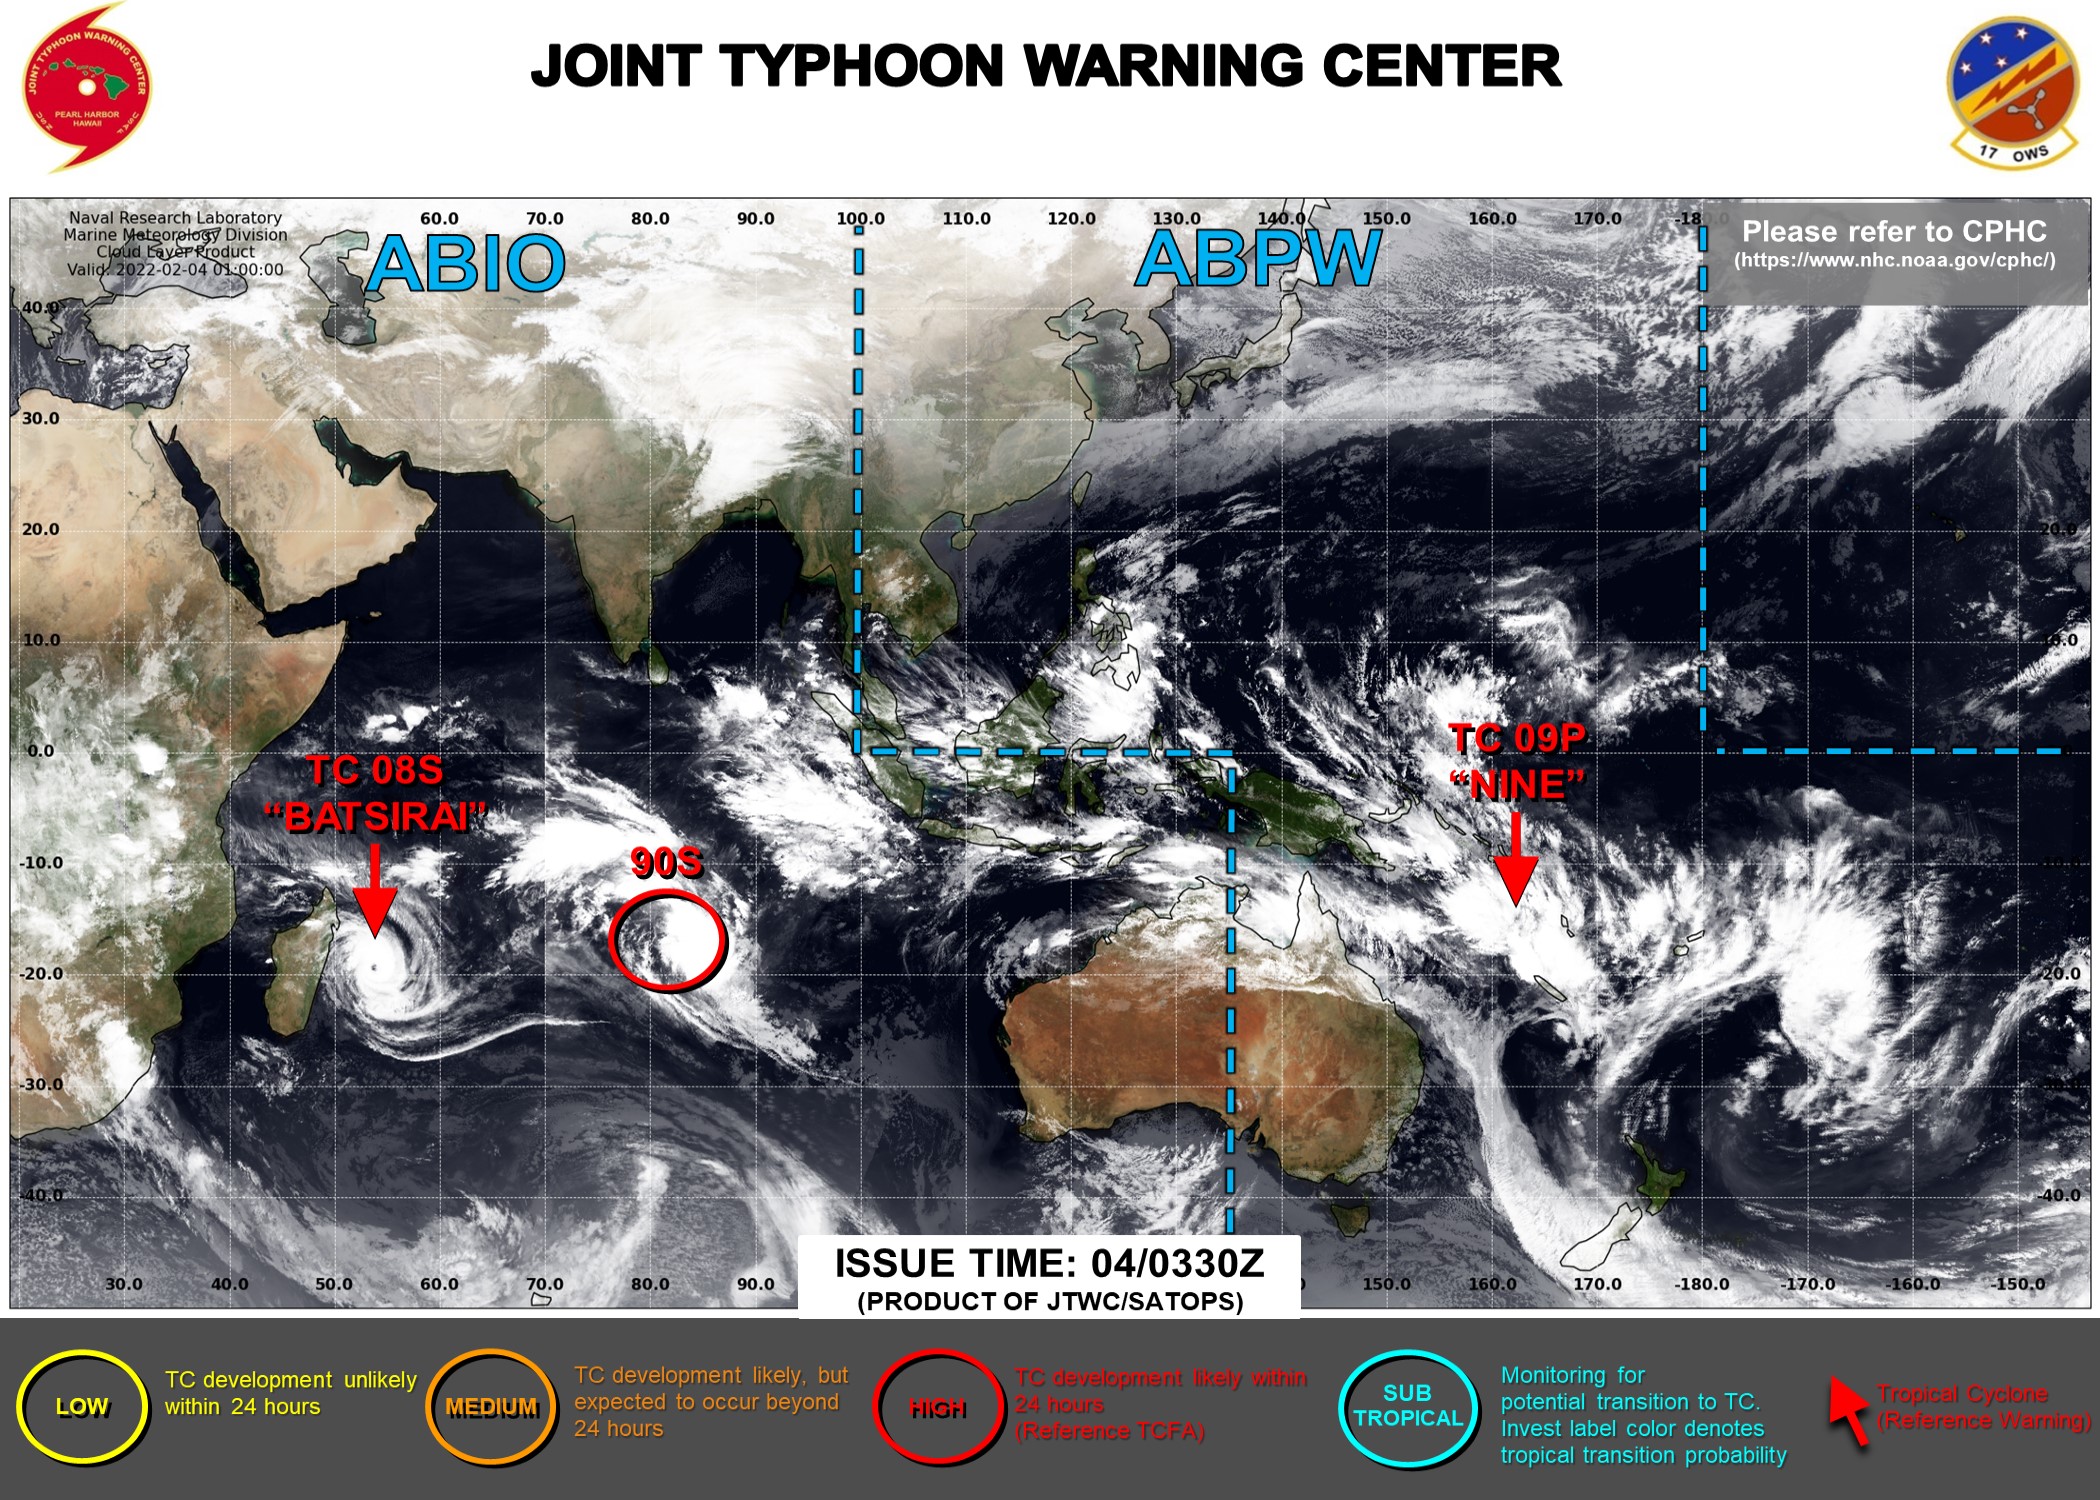 JTWC IS ISSUING 12HOURLY WARNINGS ON TC 08S(BATSIRAI). 3HOURLY SATELLITE BULLETINS ARE ISSUED ON TC 08S, INVEST 90S AND TC 09P.